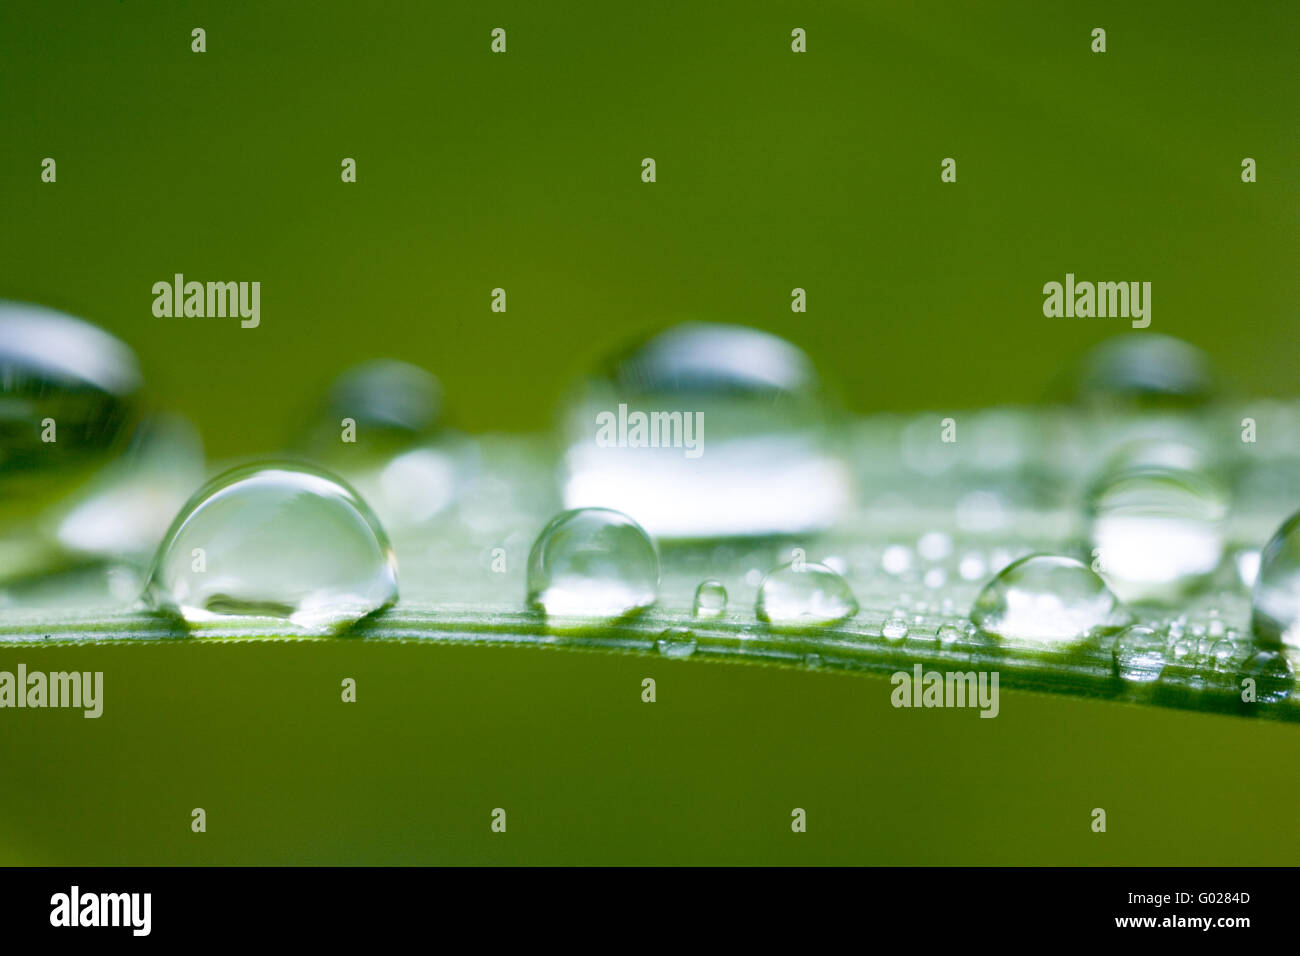 grass with waterdrops Stock Photo